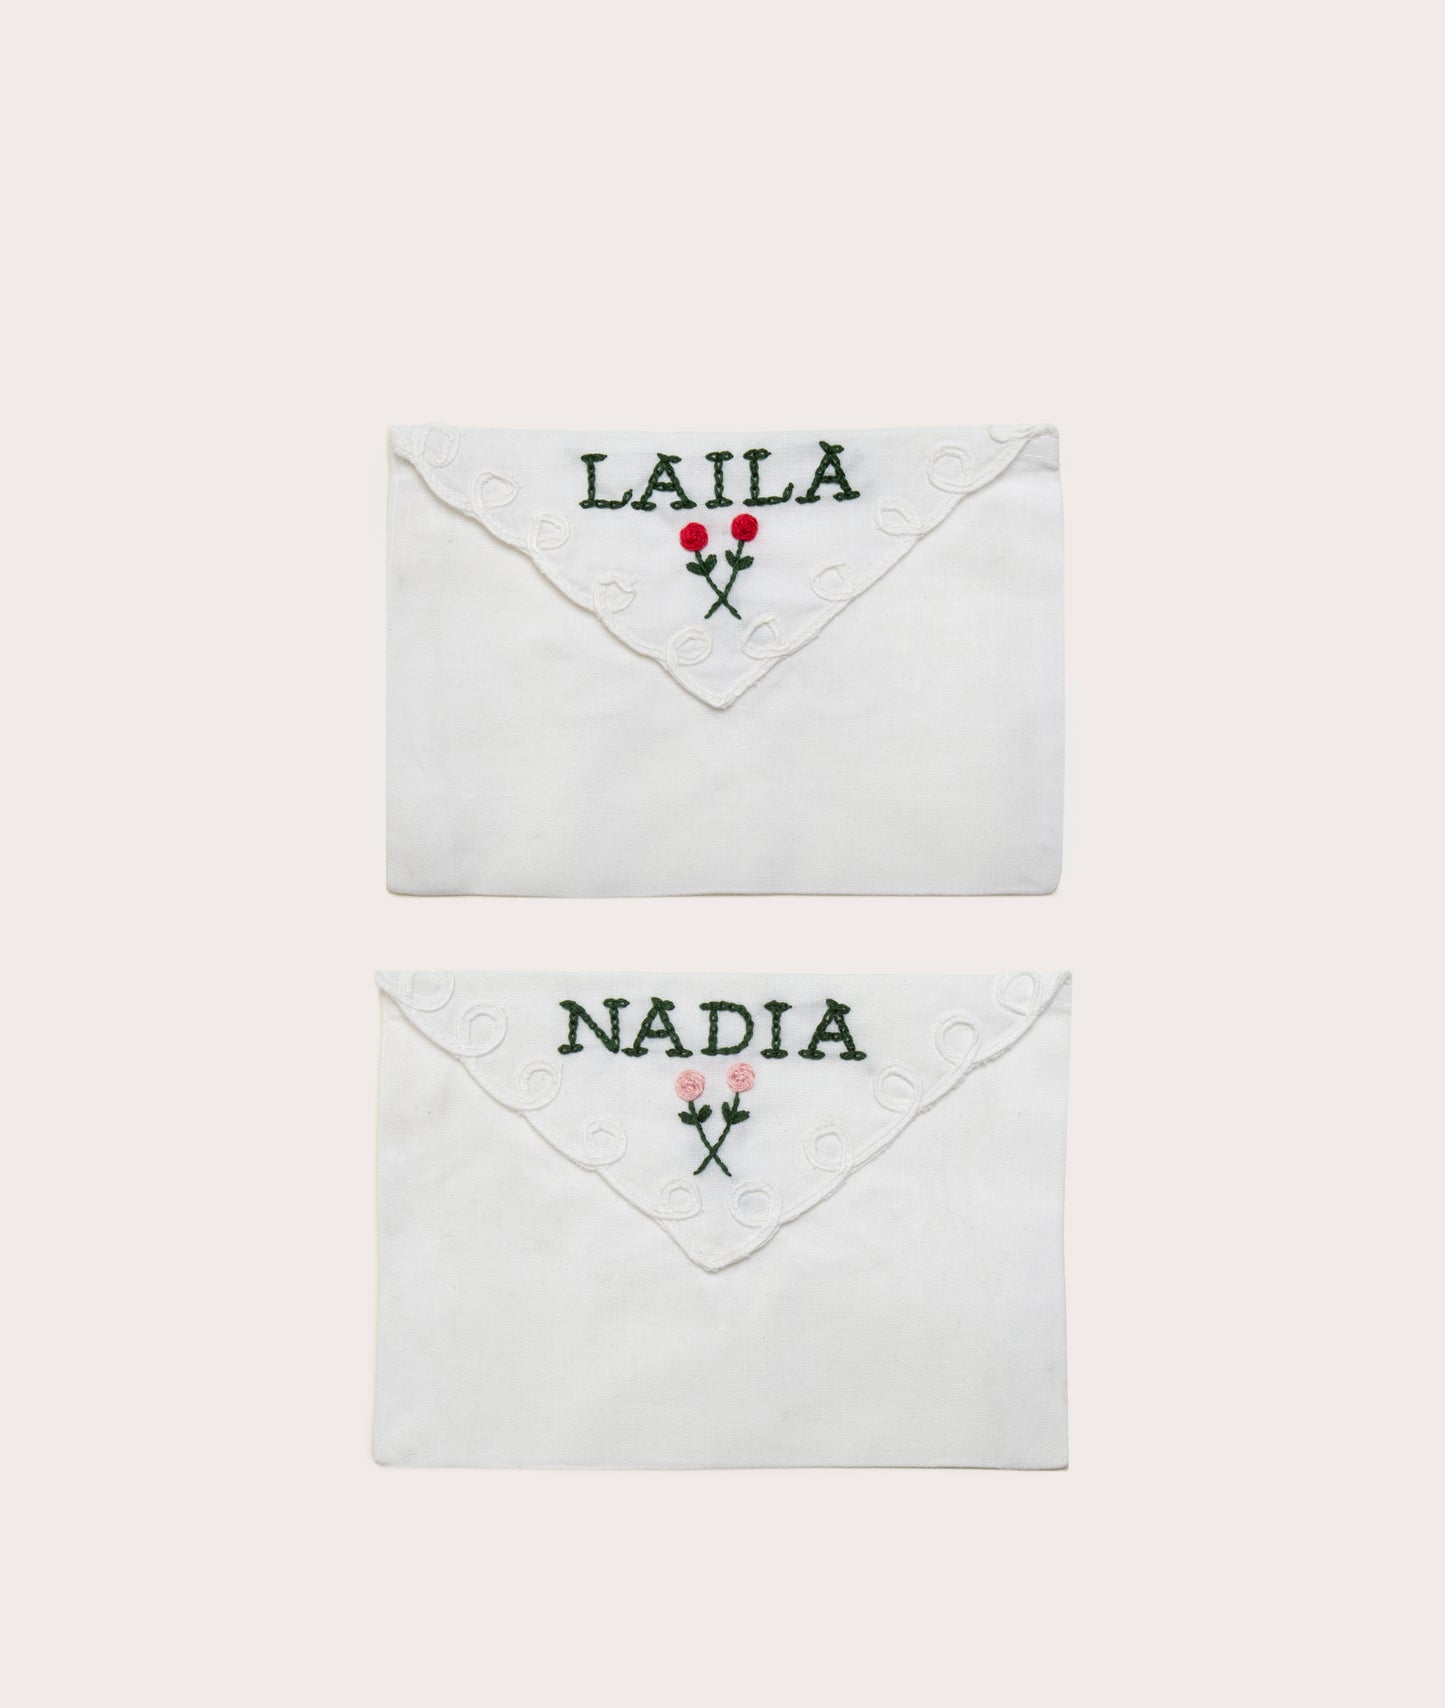 Personalized Envelope, Embroidered Lace - Pair